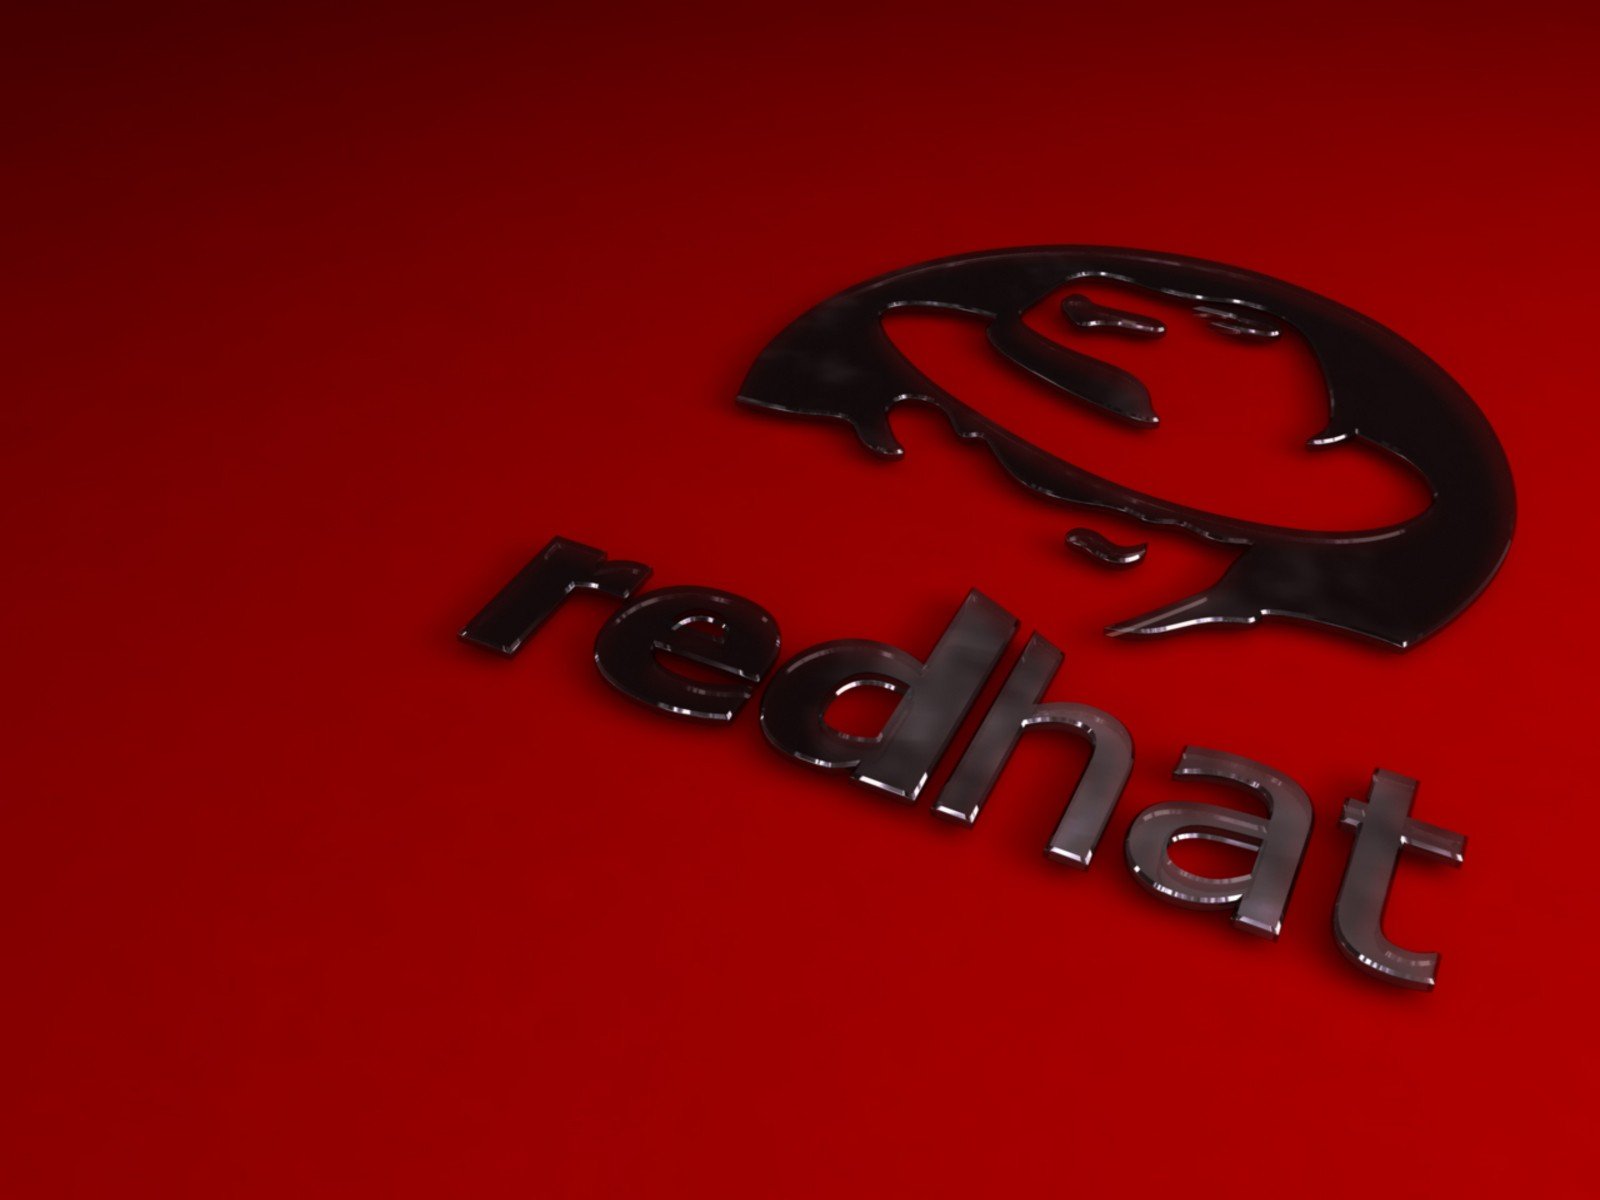 Linux Red Hat Wallpaper HD Desktop And Mobile Background